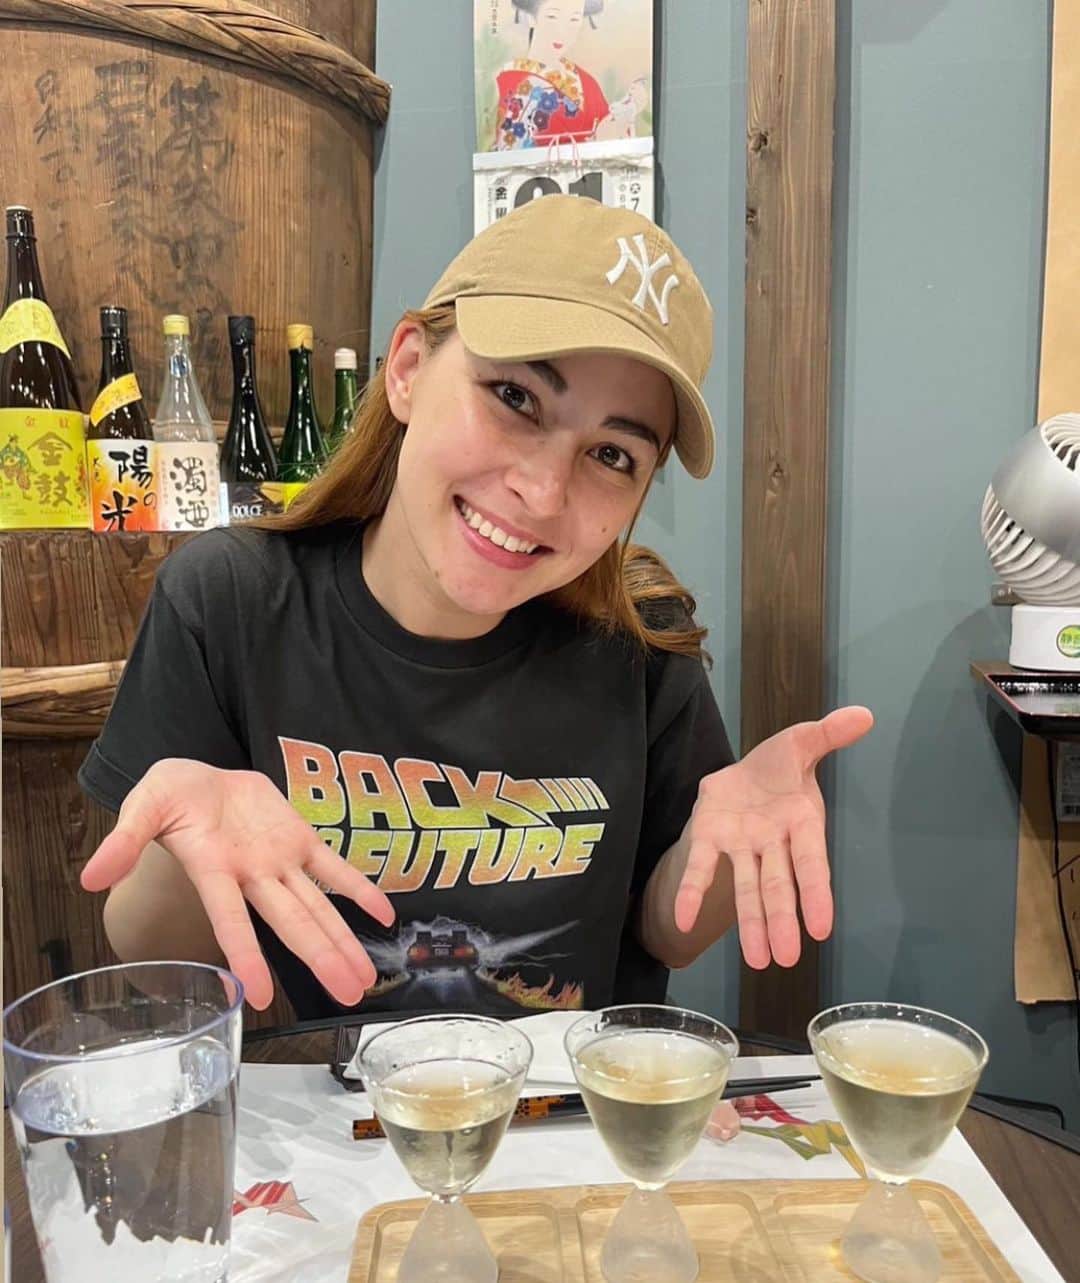 Shinjyu Lou Reid/リード真珠のインスタグラム：「3 days vacation I got due to my schedule. And I needed that 🤣🤣  Went to Nagoya / Suzuka in one day. Had some beer too 🍺  Then I spent the day at home cleaning, cooking, grocery shopping.   And ended day 3 with movie day with my family and shopped 🛍️ And yes I did hit the gym but finished the day with some sake 🍶  Being healthy mentally, physically, and socially is so important and I was able to recover from all the stress and concern within this vacation🥰  自然とスケジュールの関係でなった三連休は 身体的精神的社会的に健康になるためにリカバリーした三日間。 名古屋と鈴鹿にいってビールもしっかり飲んで。 家中の掃除と、grocery買いに行き、おかずの作り置きや冷凍のミールプレップ。 最後は家族でミッションインポッシブルみて(めっっちゃよかった) お買い物🛍️ 夫がジェラピケのパジャマをプレゼントしてくれた🎁♡ お買い物の後はしっかりジムに行って、連休の締めくくりは日本酒🍶  過ごしてくれた全ての人に感謝♡」